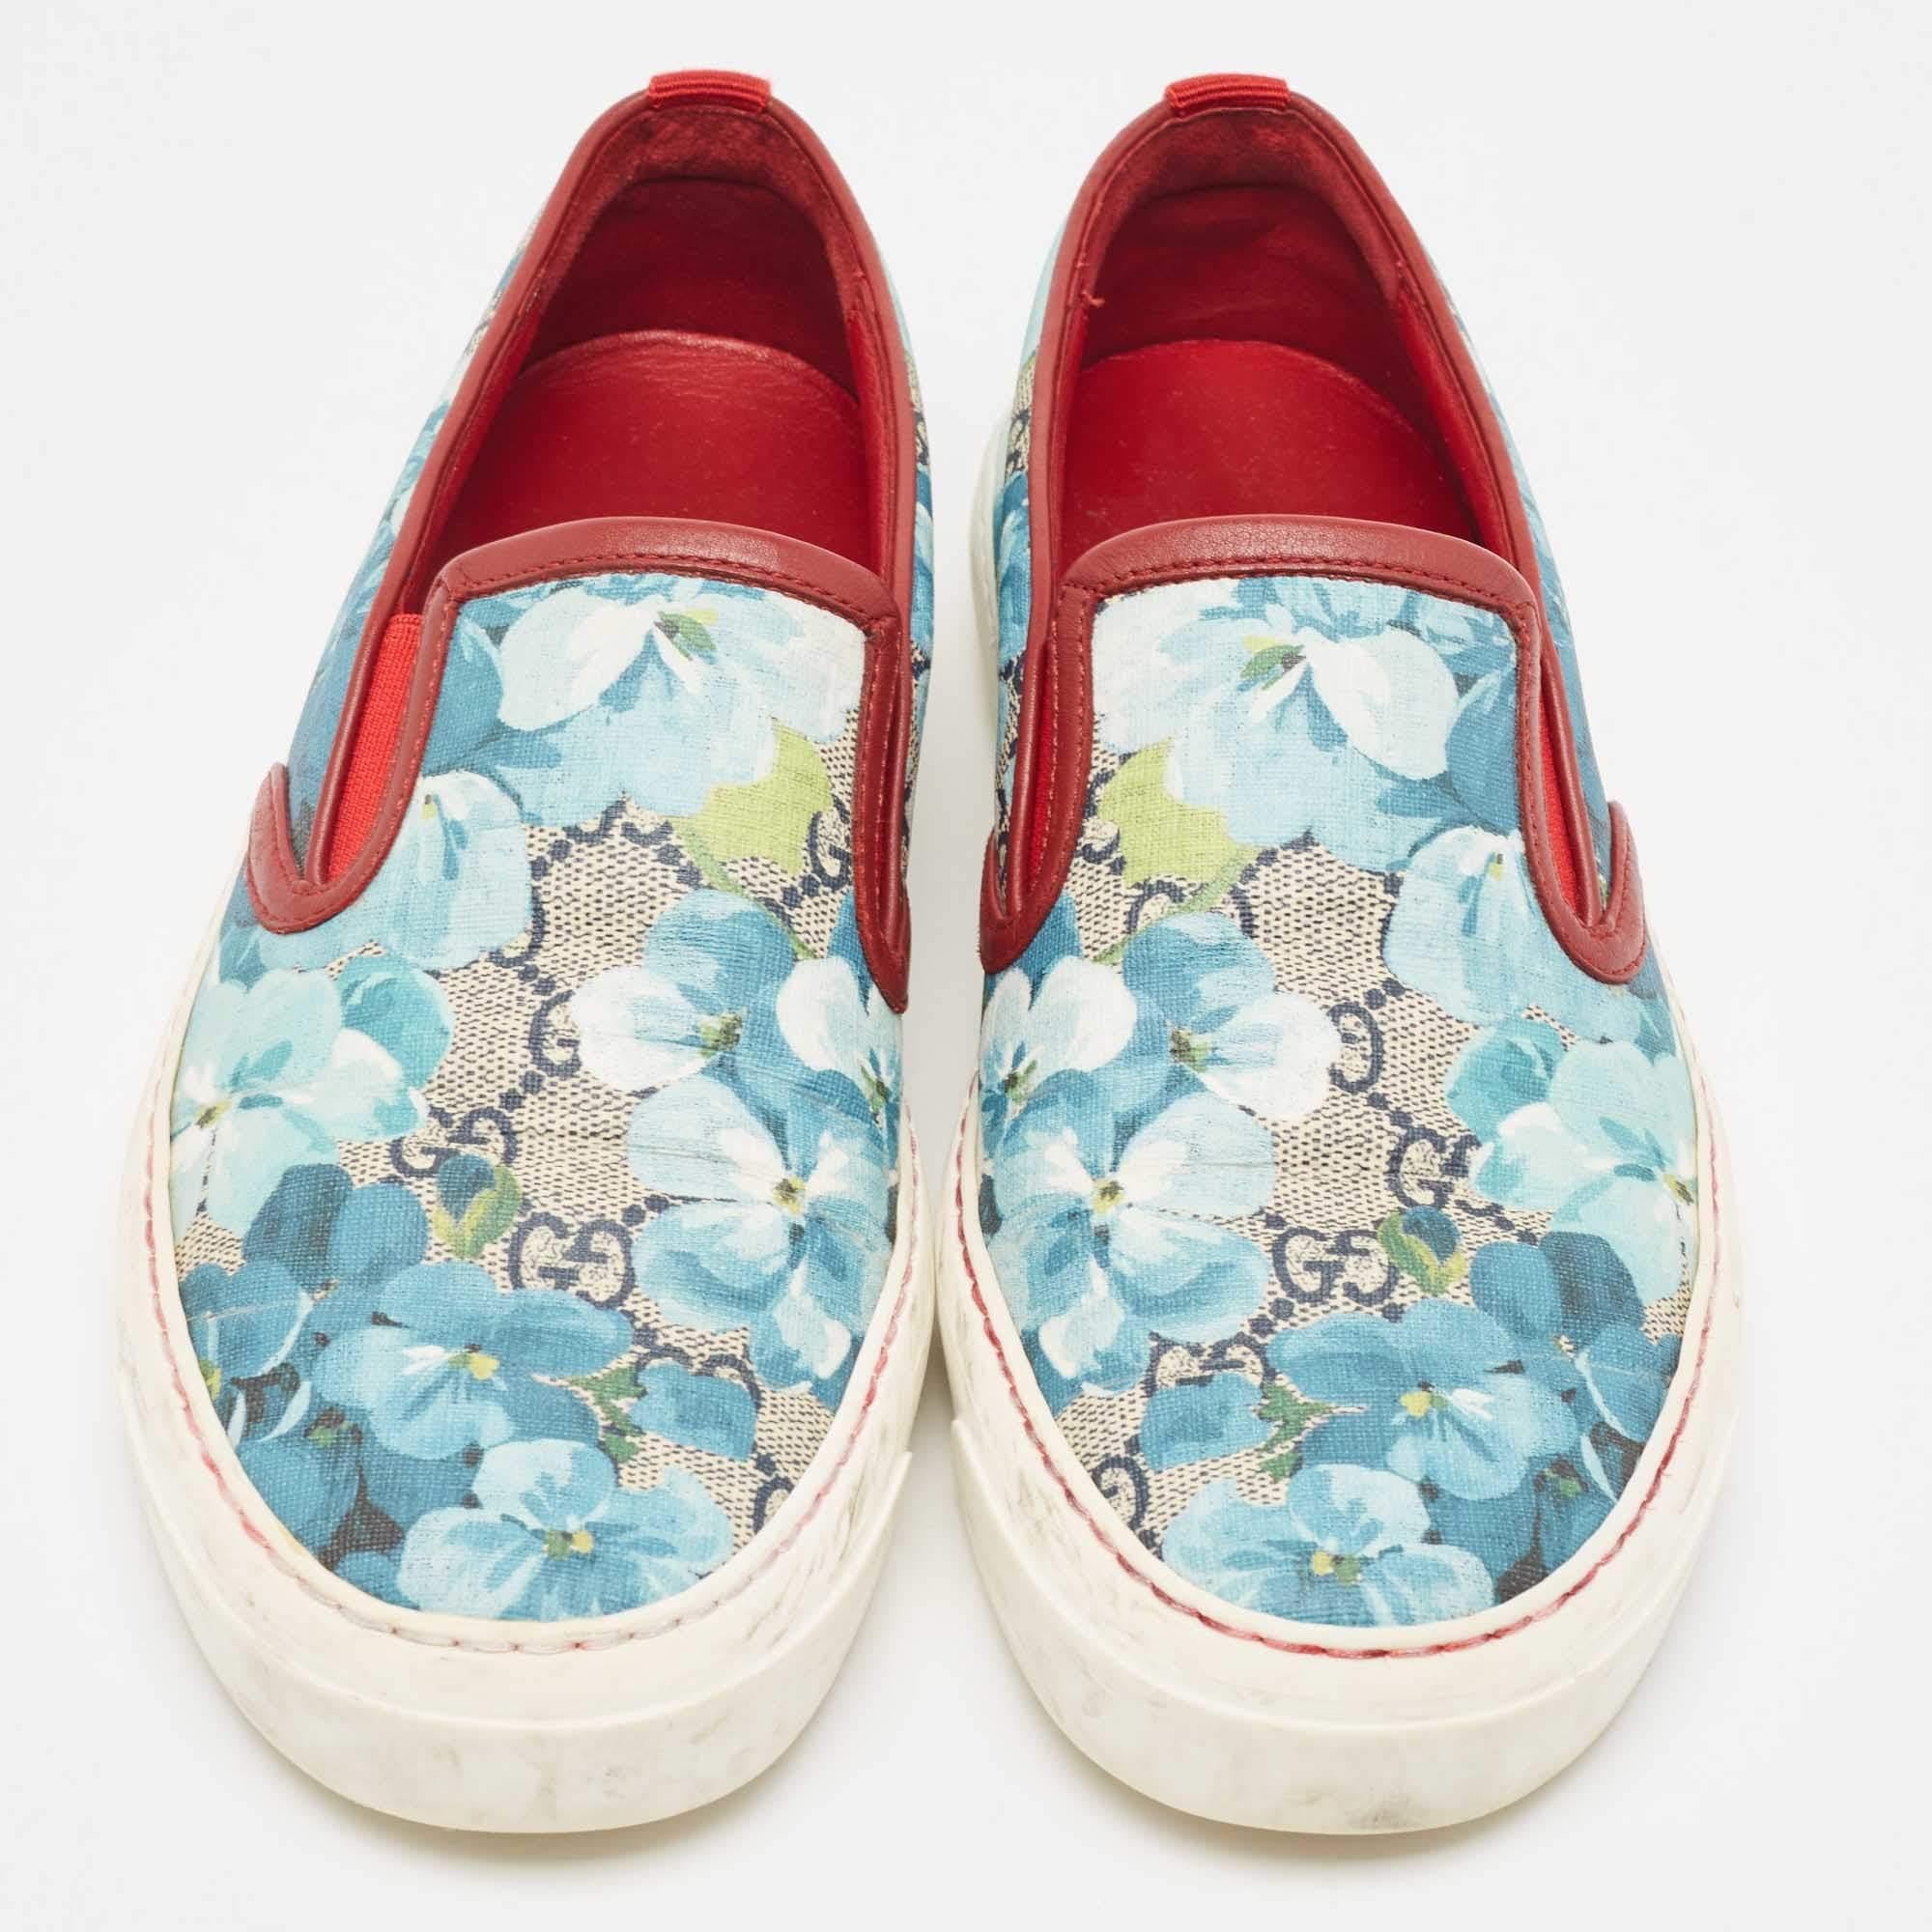 Gucci Multicolor GG Supreme Blooms Printed Canvas Slip On Sneakers Size 37.5 For Sale 1